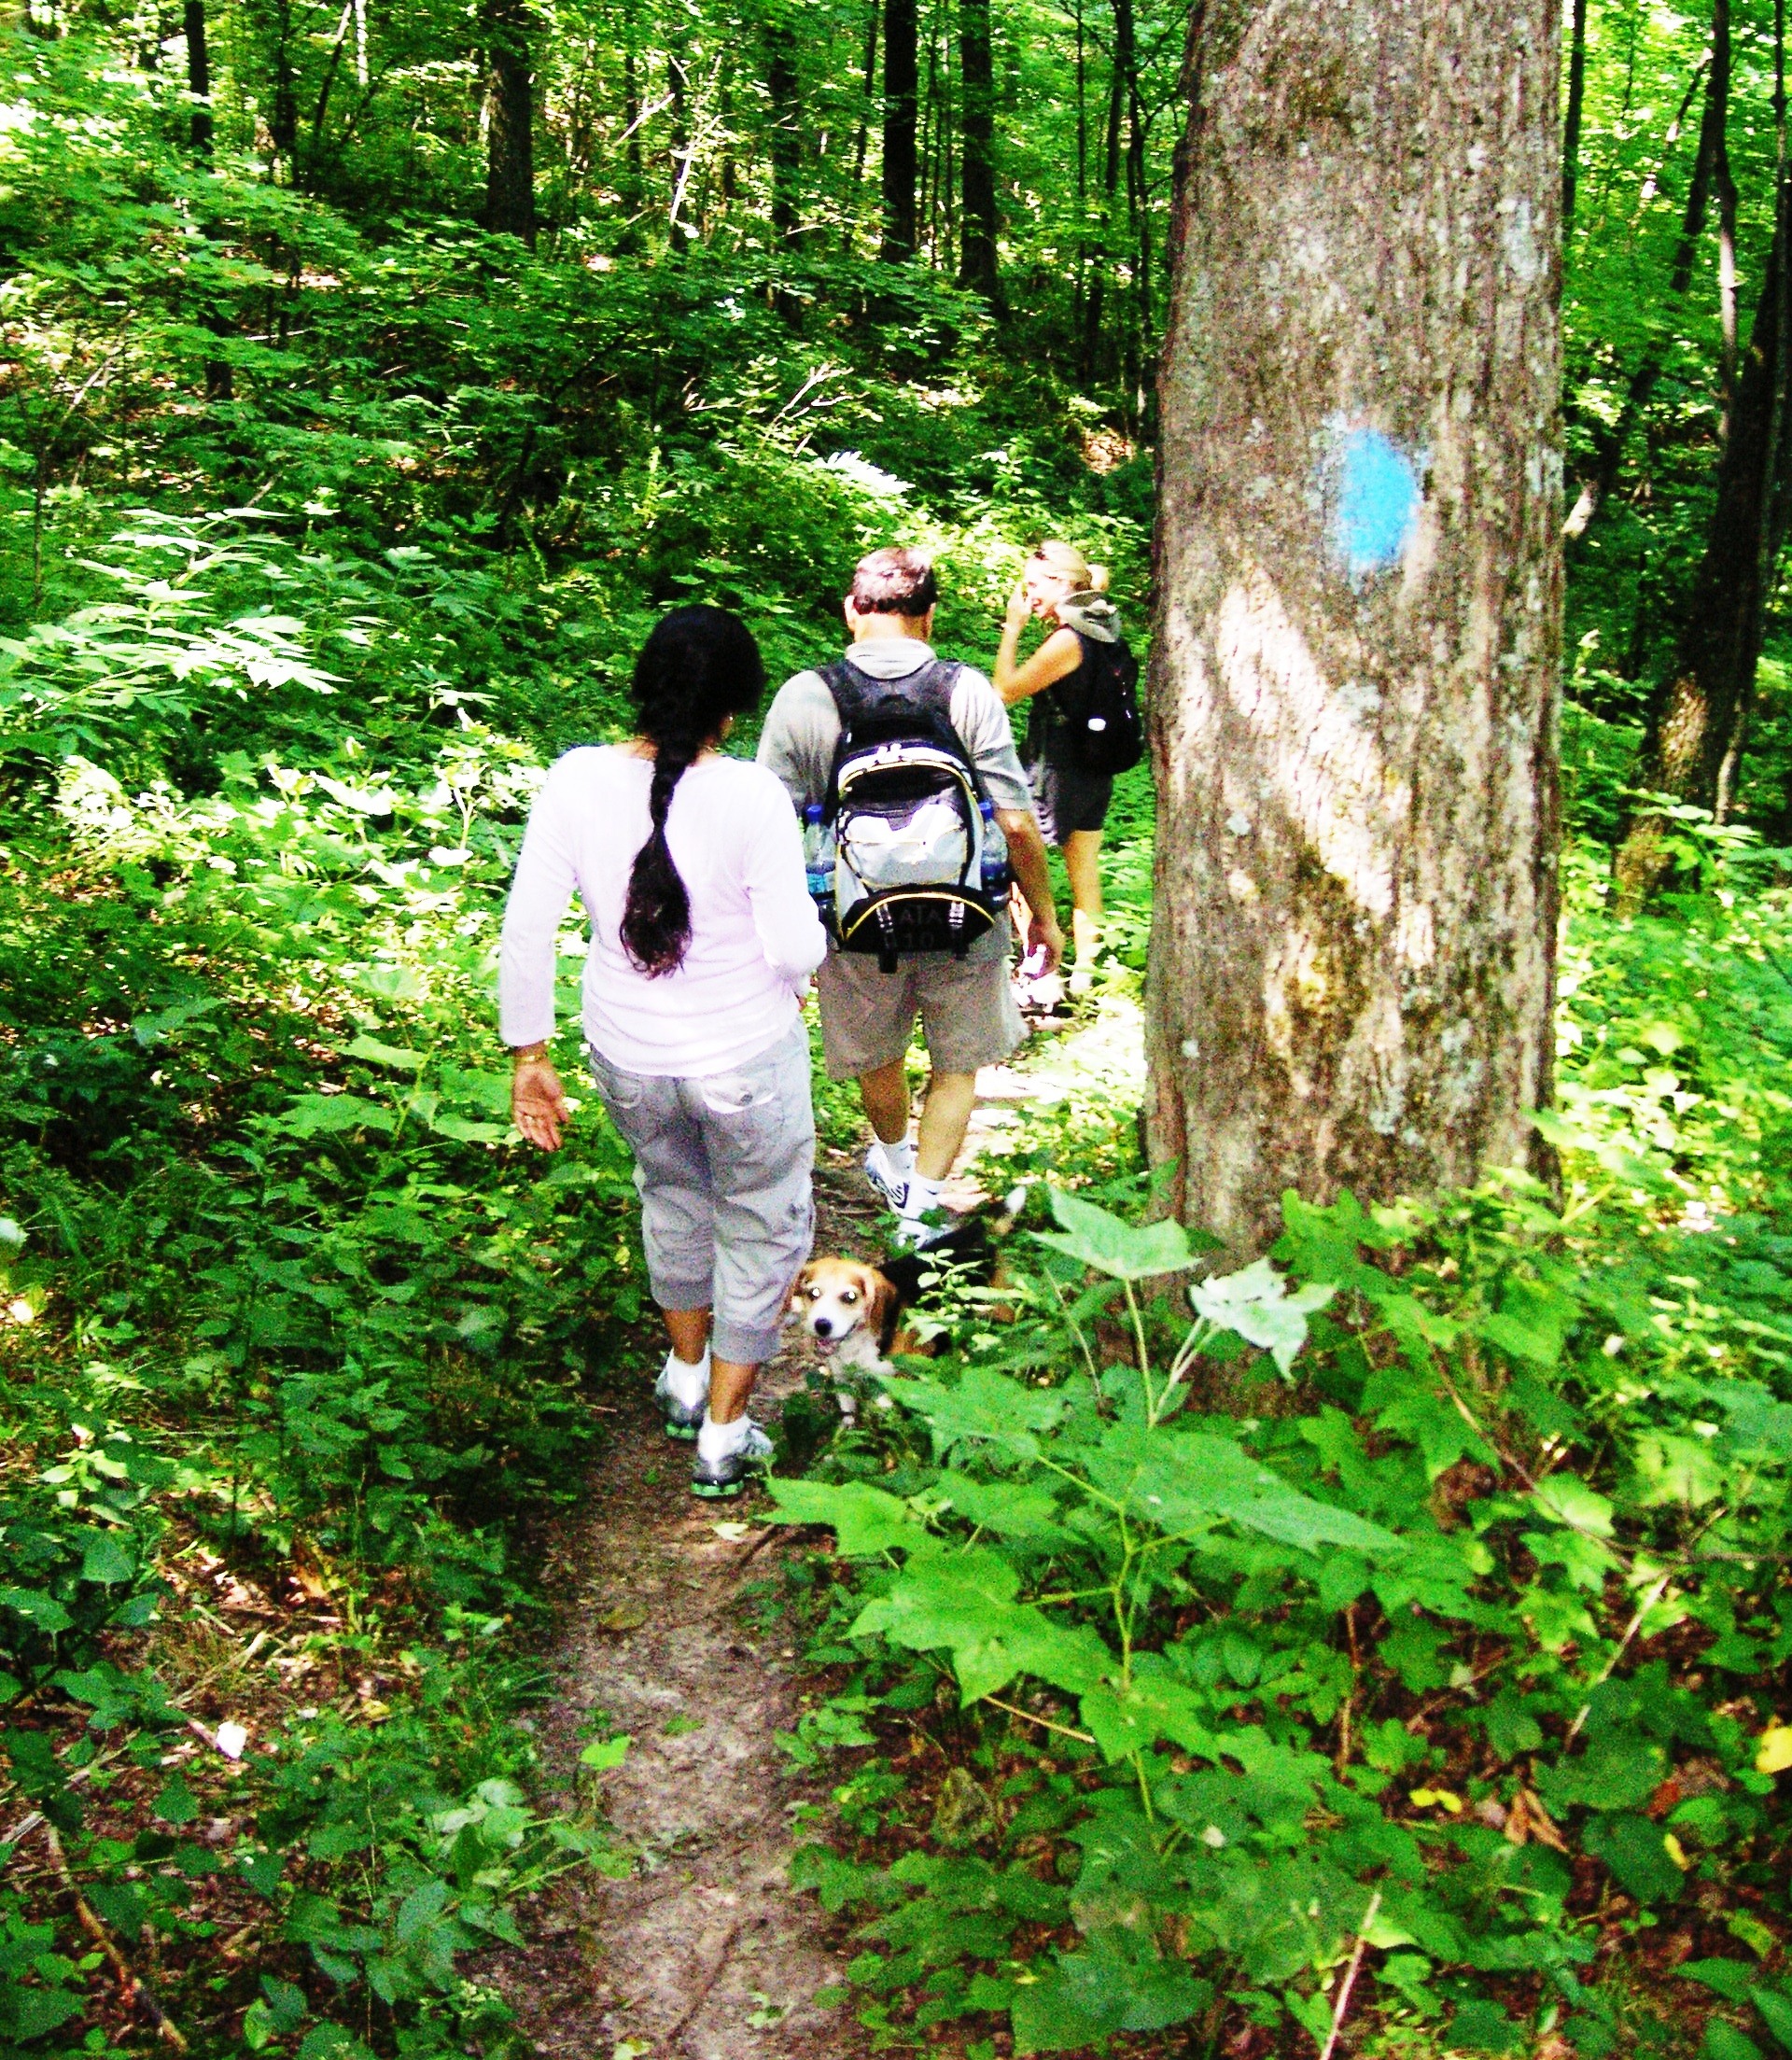 Hiking along the Appalachian Trail in Vermont